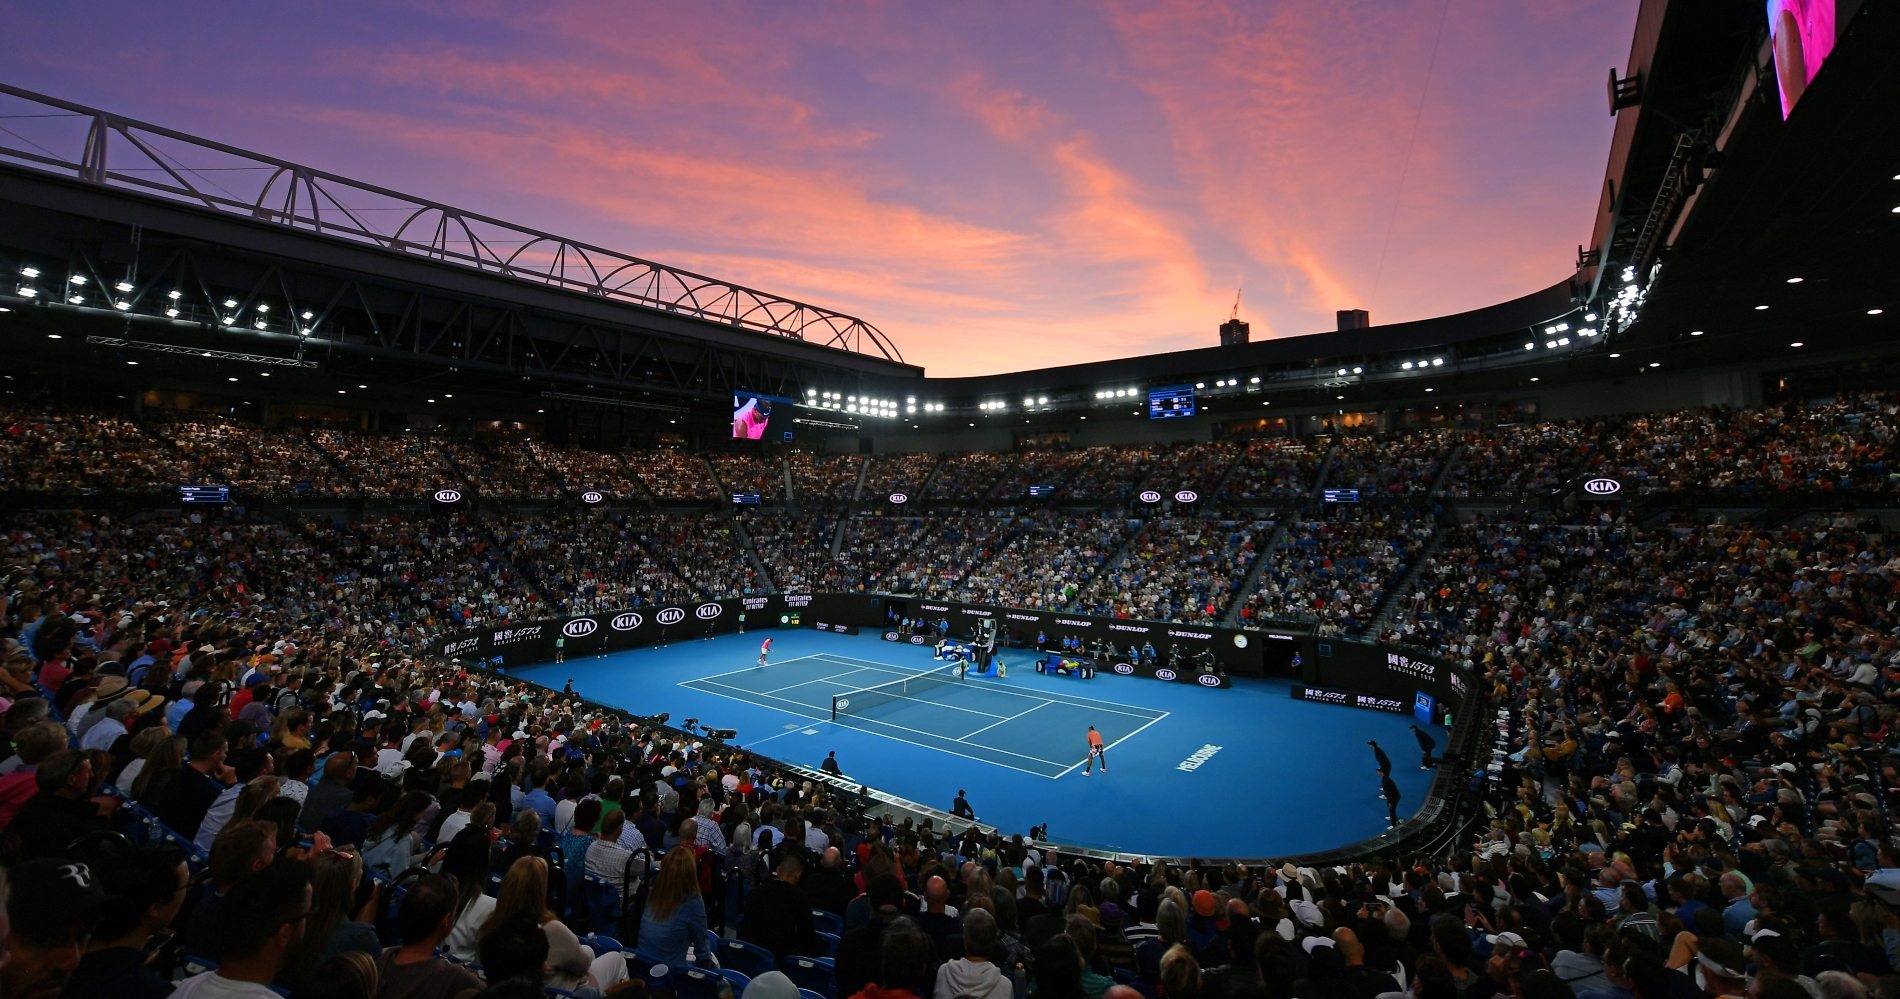 A view of the Rod Laver Arena at sunset